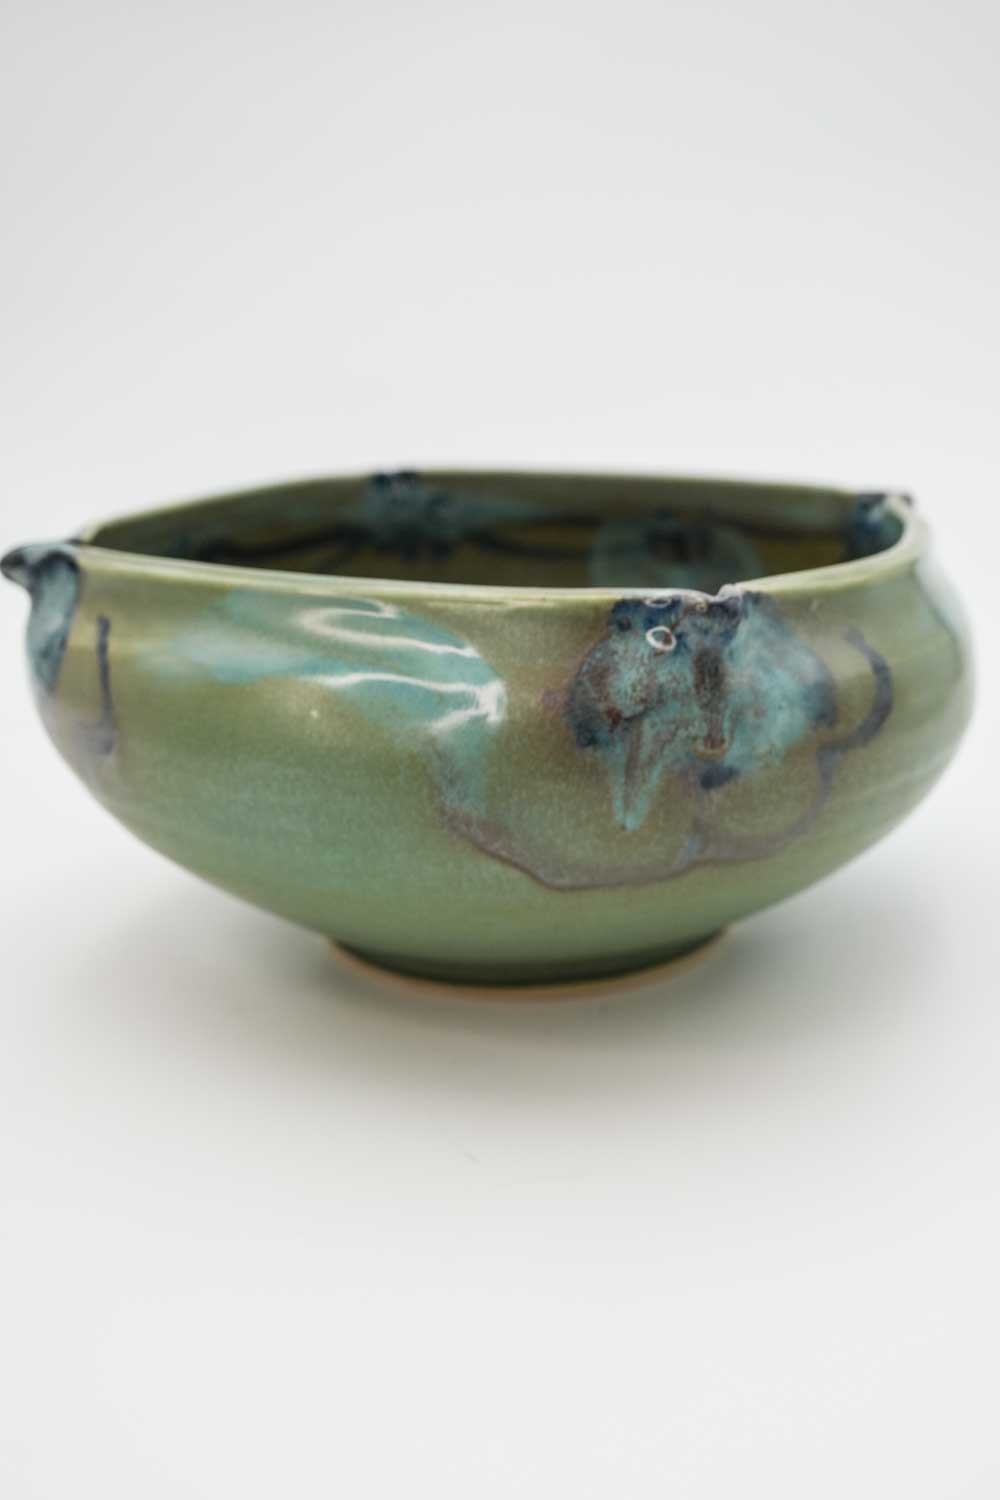 A medium size, hand thrown ceramic bowl with fluted edges.  Dominate color is sage green.  Painted with abstract blue flowers.